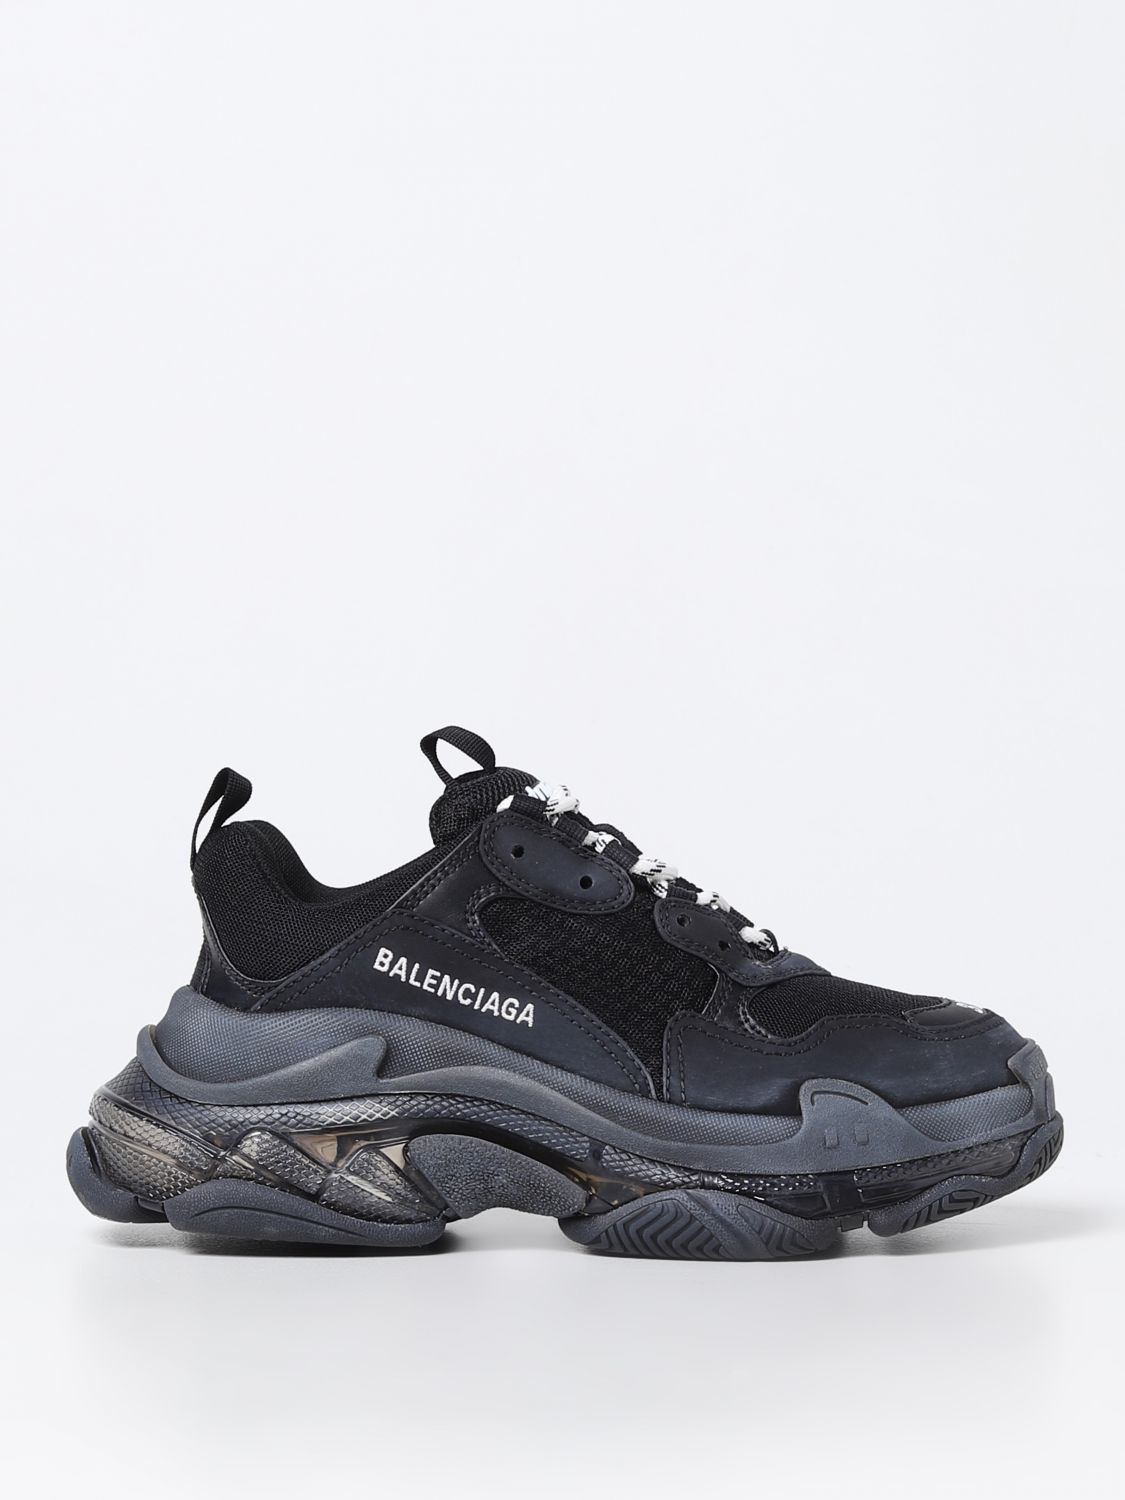 BALENCIAGA: Triple S sneakers in synthetic leather and mesh - Black Balenciaga 544351W2FB1 online at